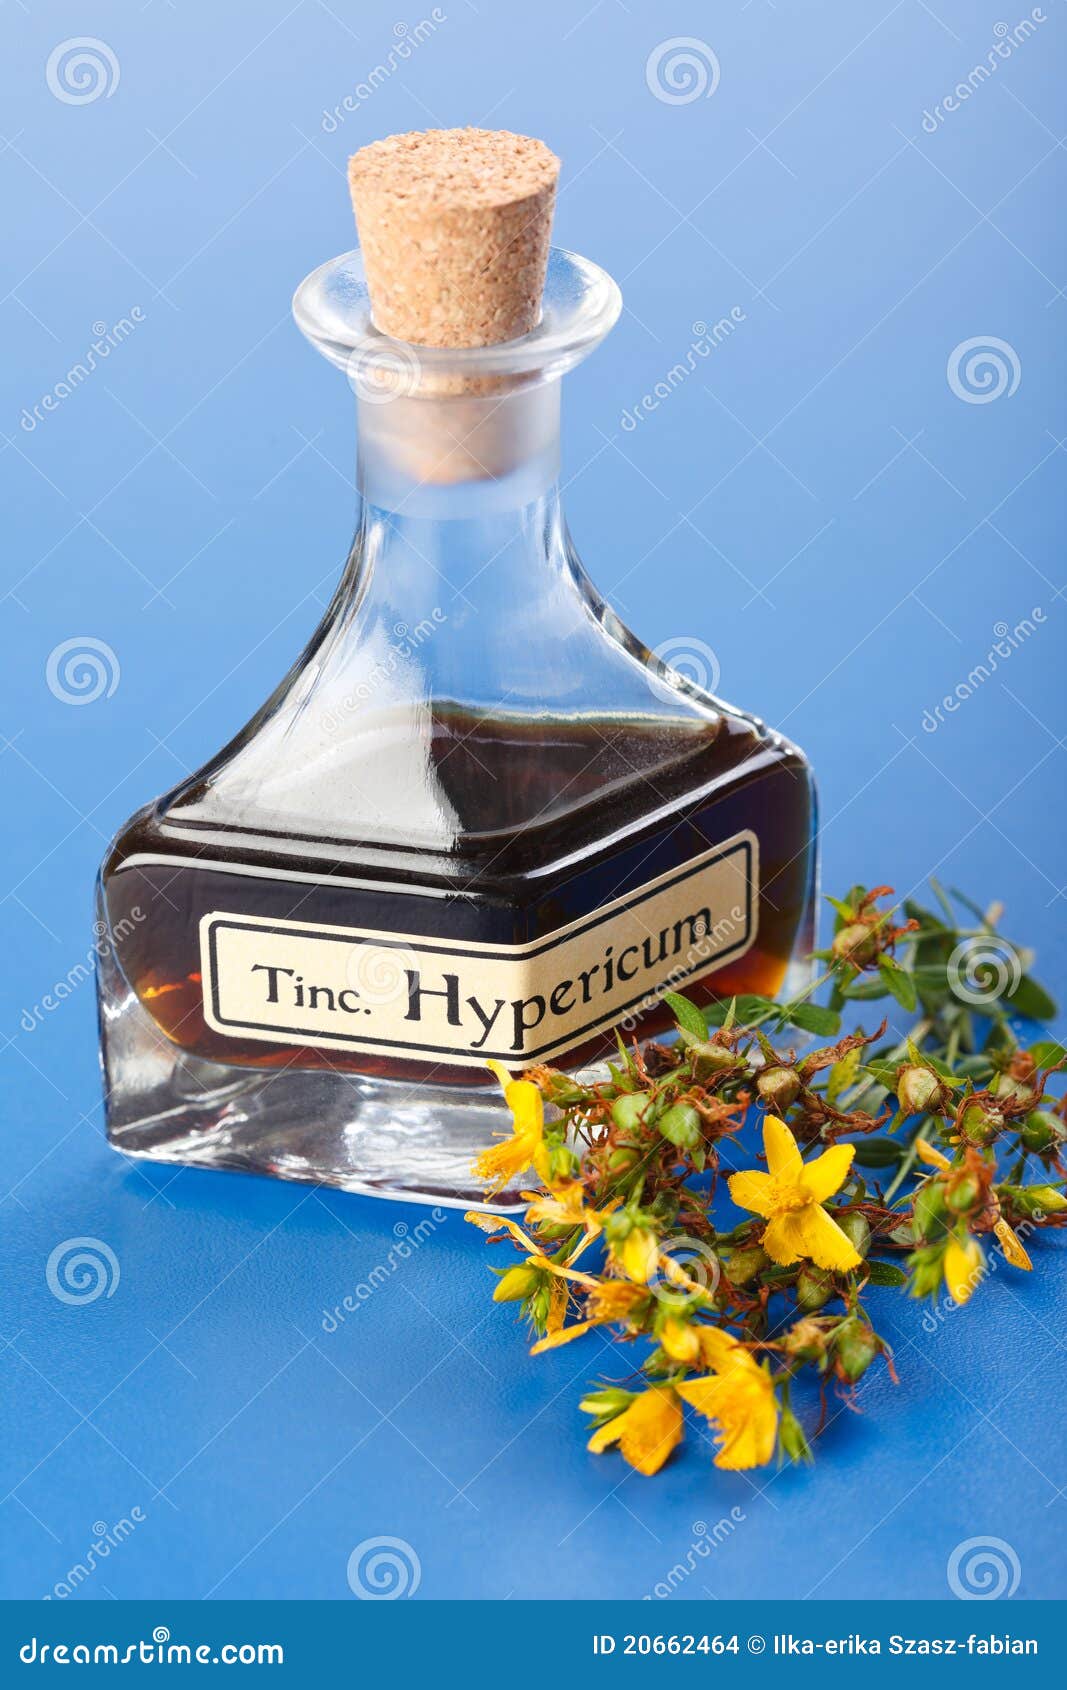 hypericum plant and extract